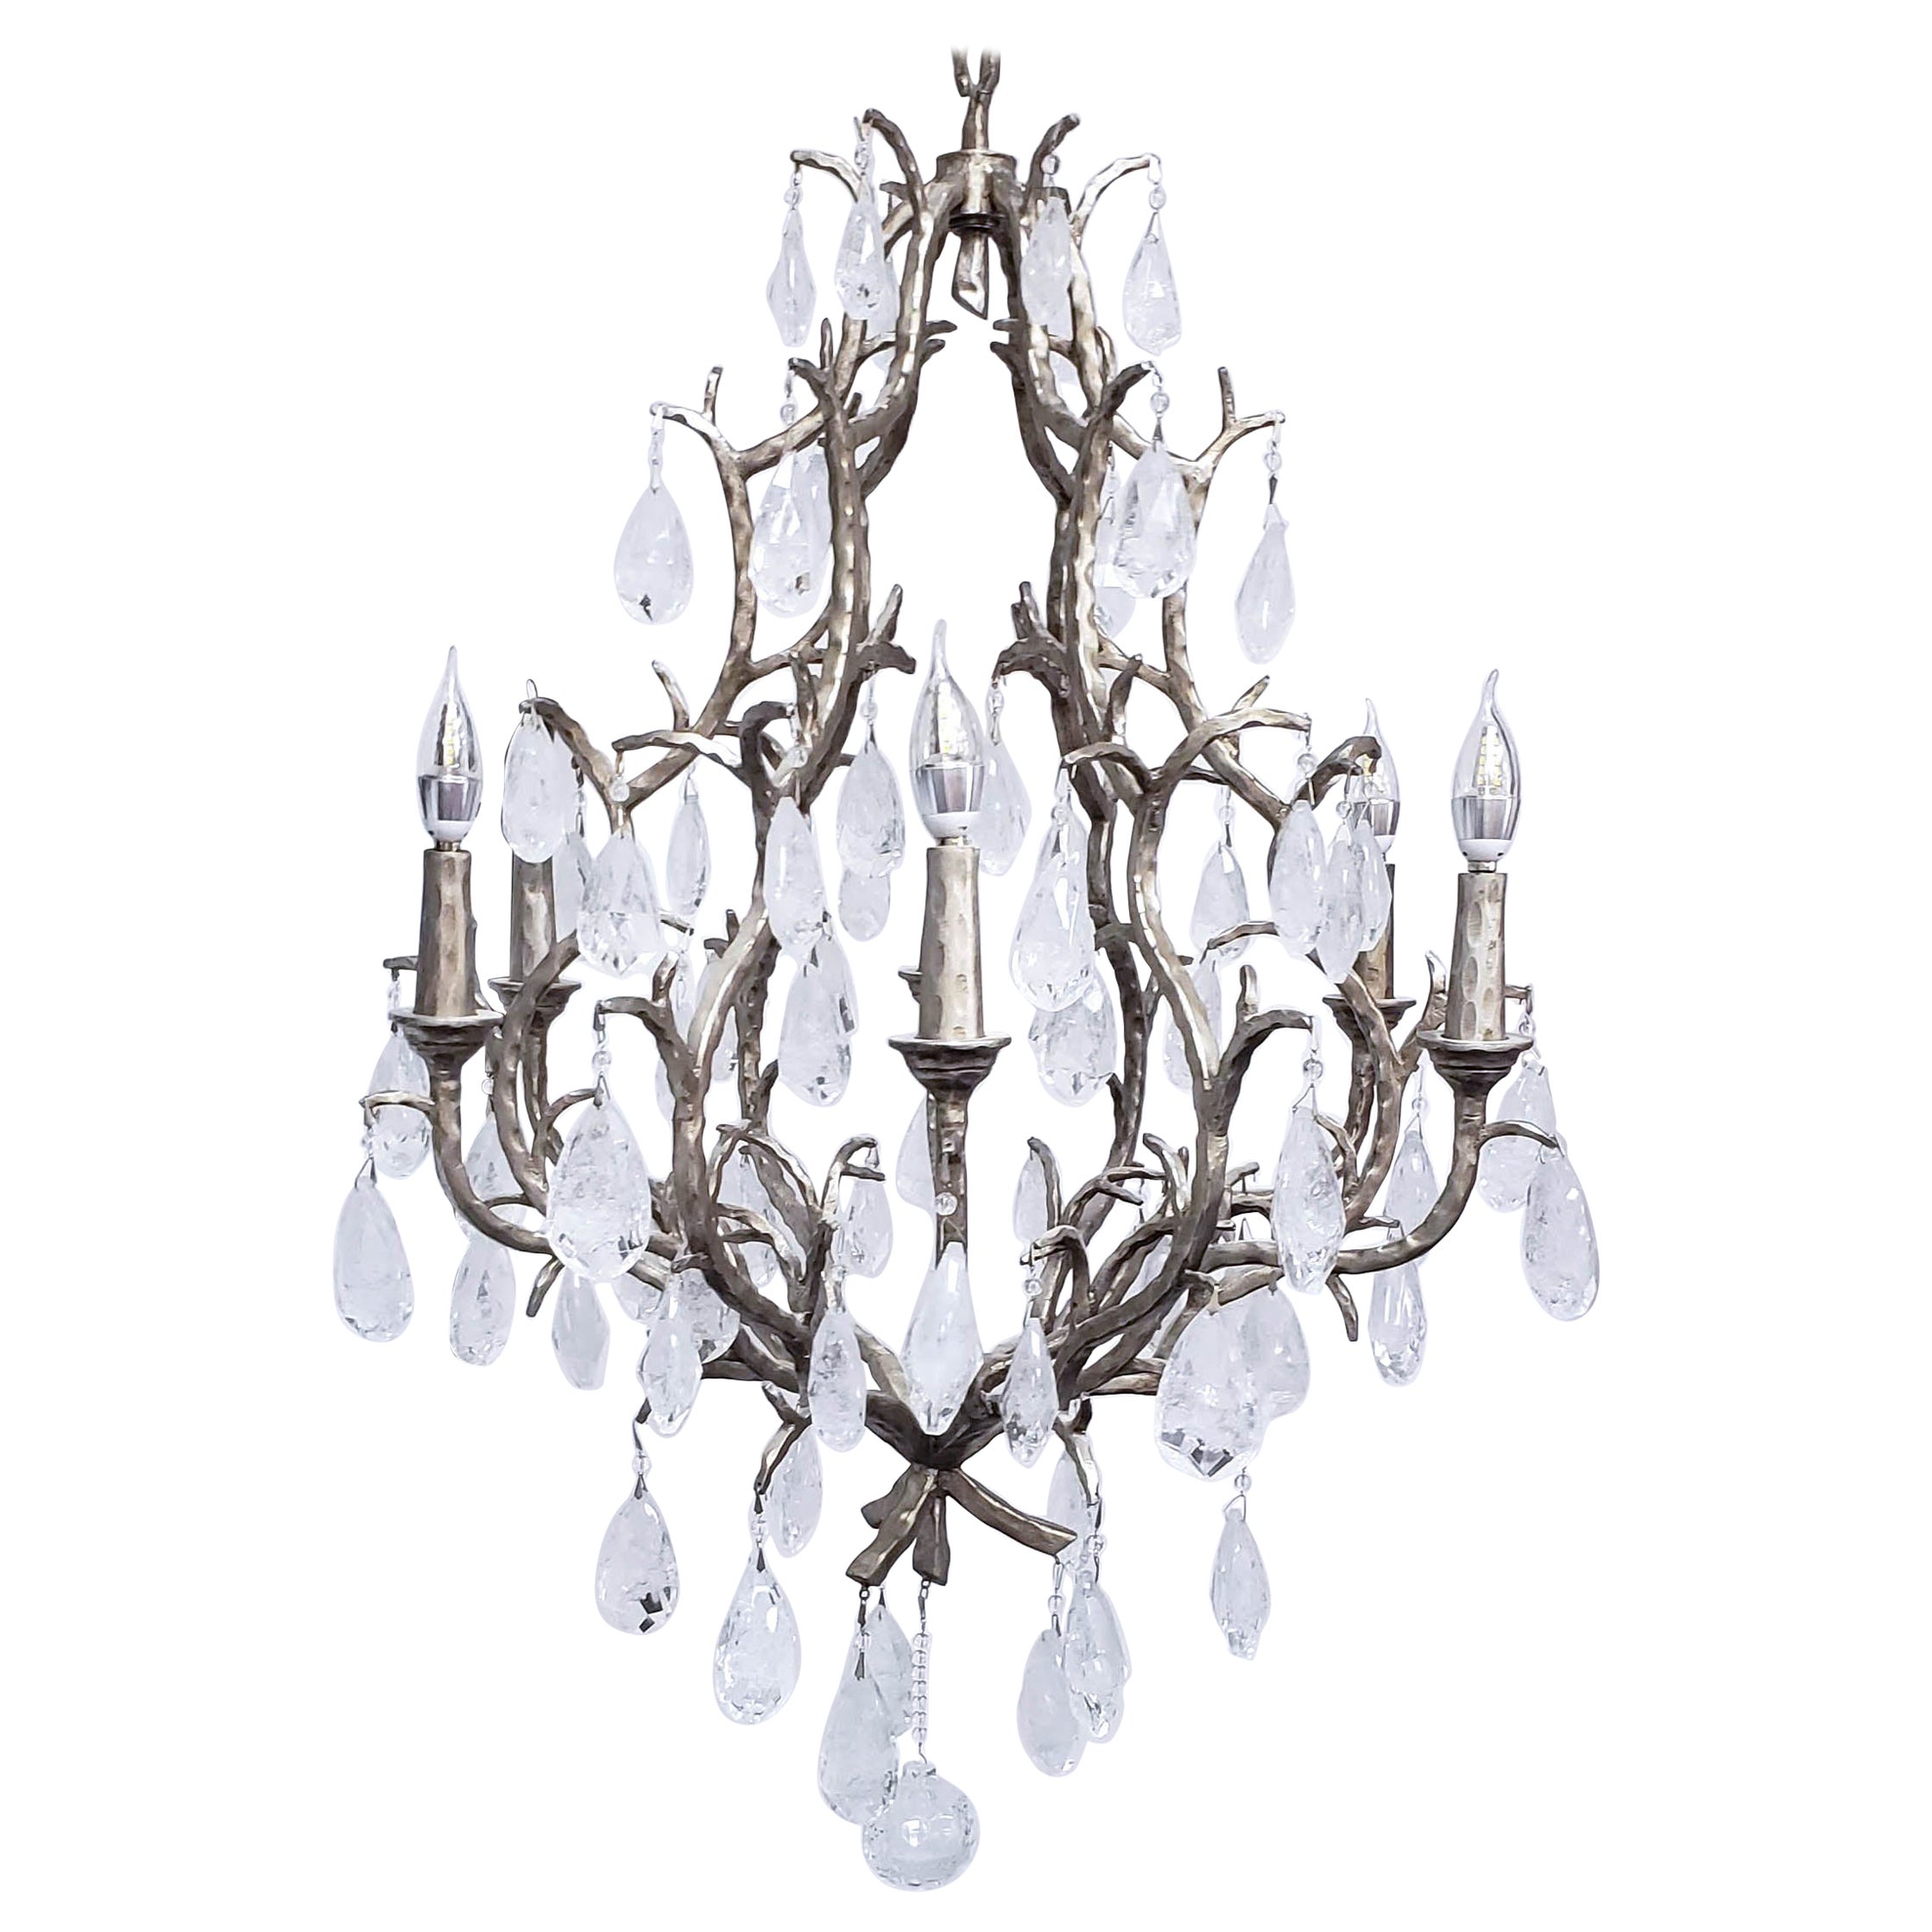 Rock Crystal 6 Arm Handcrafted Iron Twig Chandelier